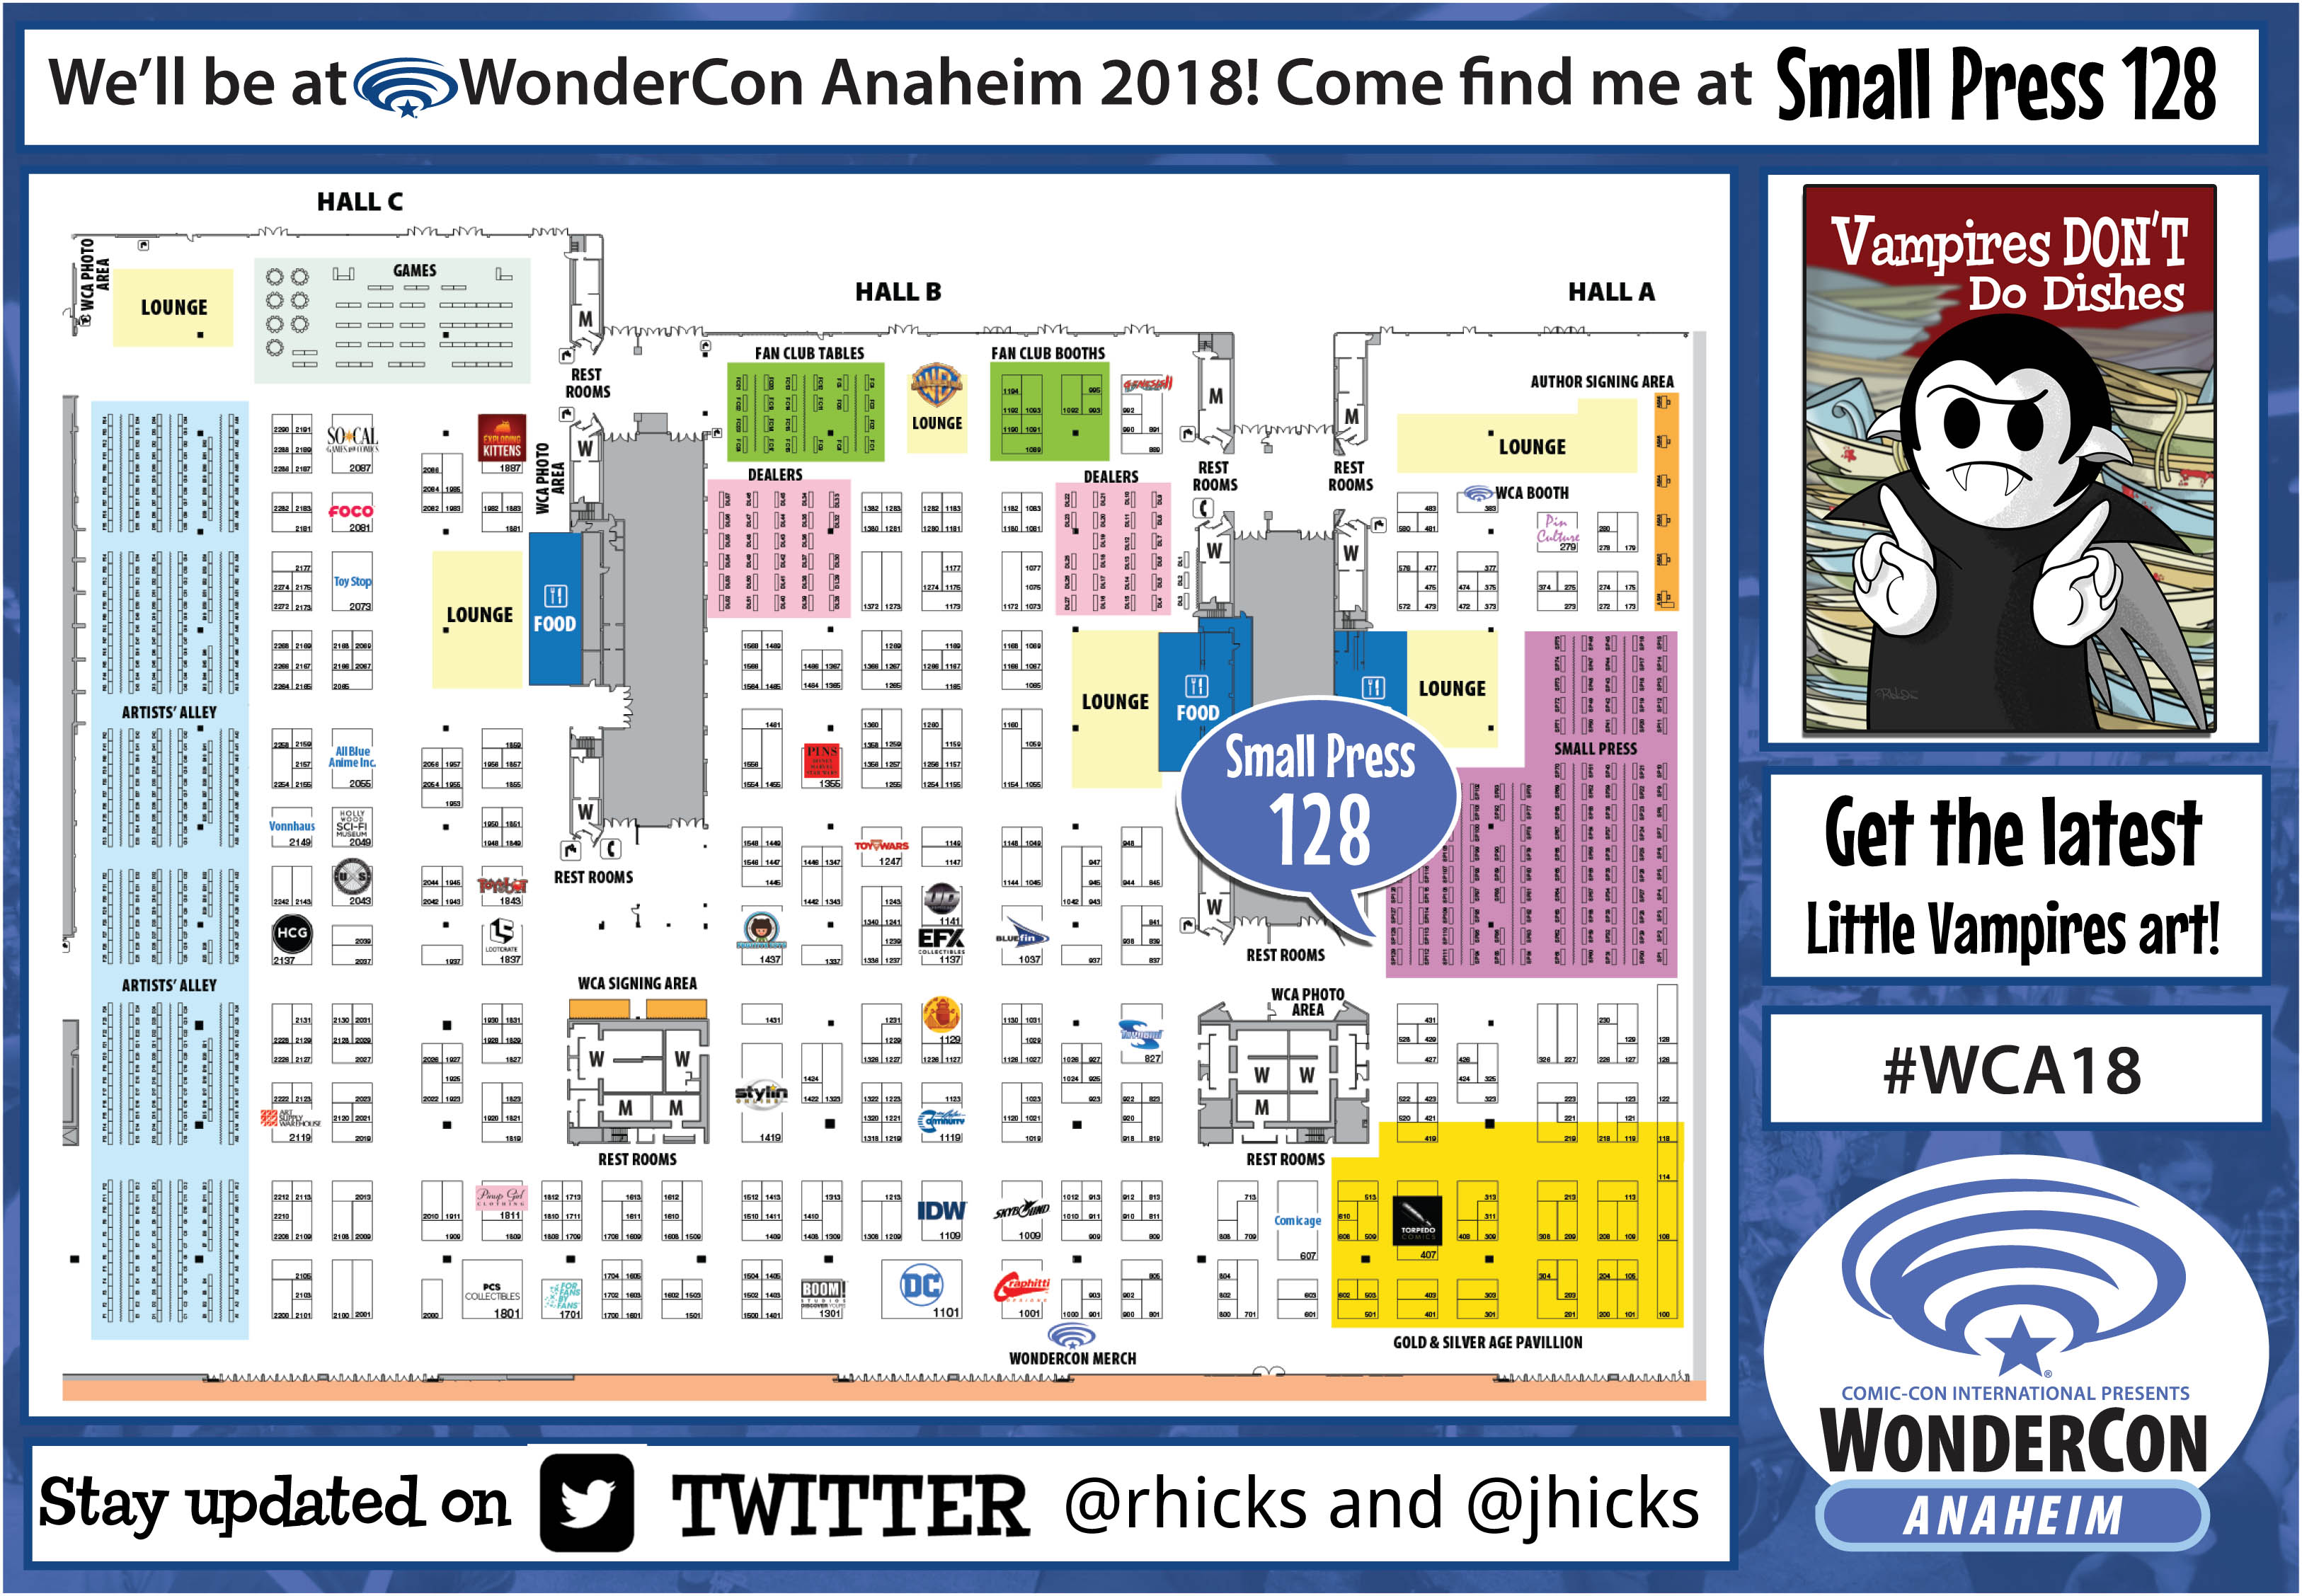 WonderCon 2018 exhibitor floor map with the Little Vampires booth highlighted